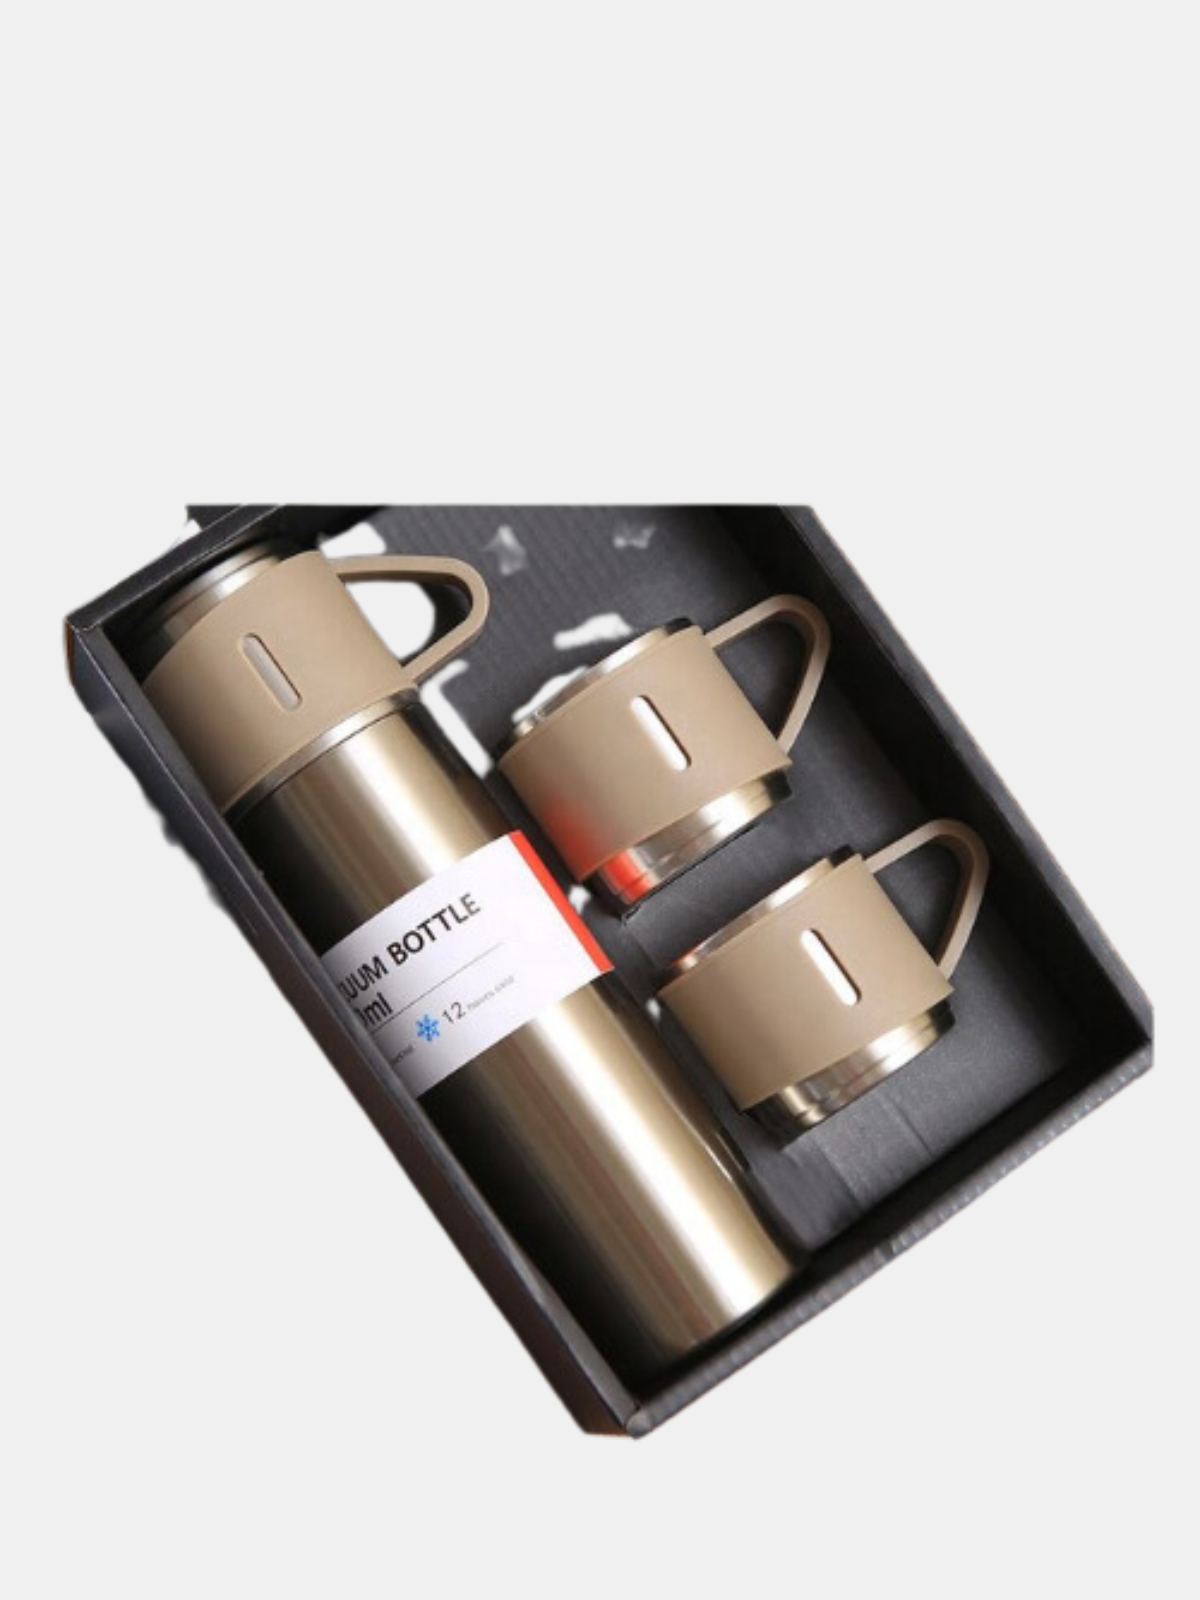 https://images.verishop.com/vigor-vacuum-flask-thermos-cup-luxury-coffee-mug-table-top-usb-charging-combo-pack/M00718157427471-3968137292?auto=format&cs=strip&fit=max&w=1200